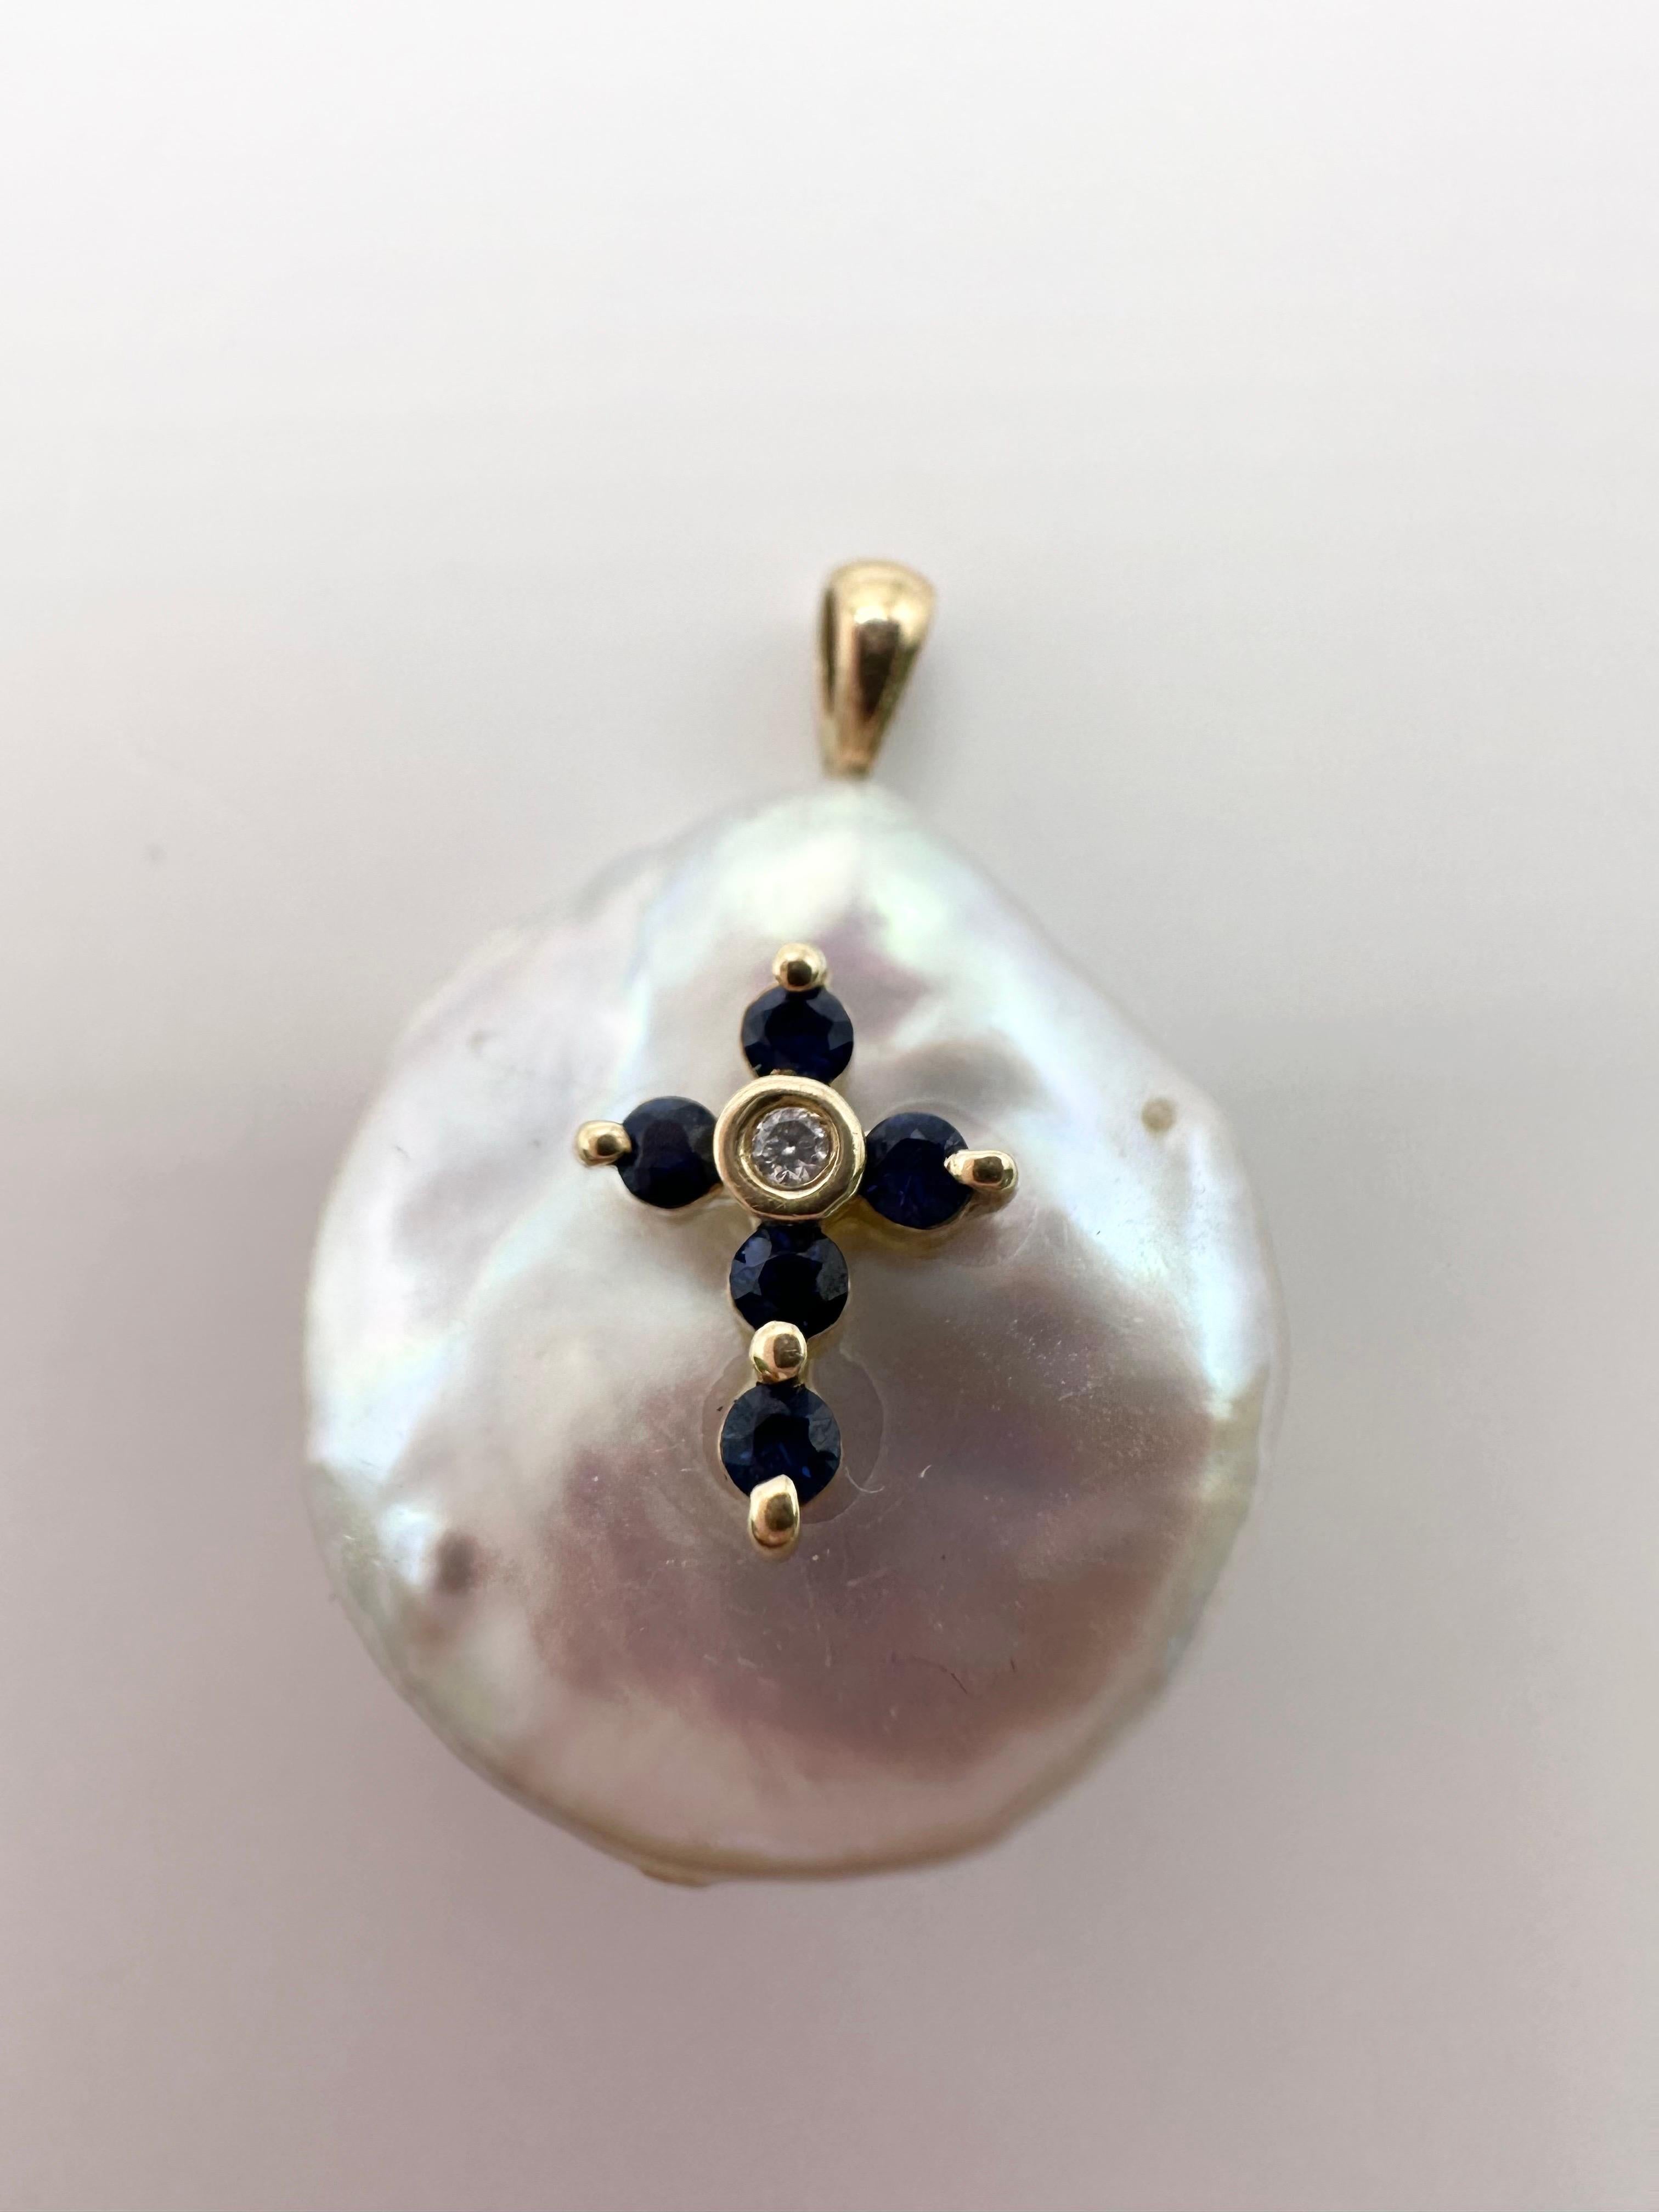 Baroque natural pearl with natural sapphires cross pendant, this piece is made with quality not glued but rather assembled all together to make a unique jewelry statement in 14Kt gold.

Metal Type: 14KT

Natural Sapphire(s): 
Color: Blue
Cut:Round